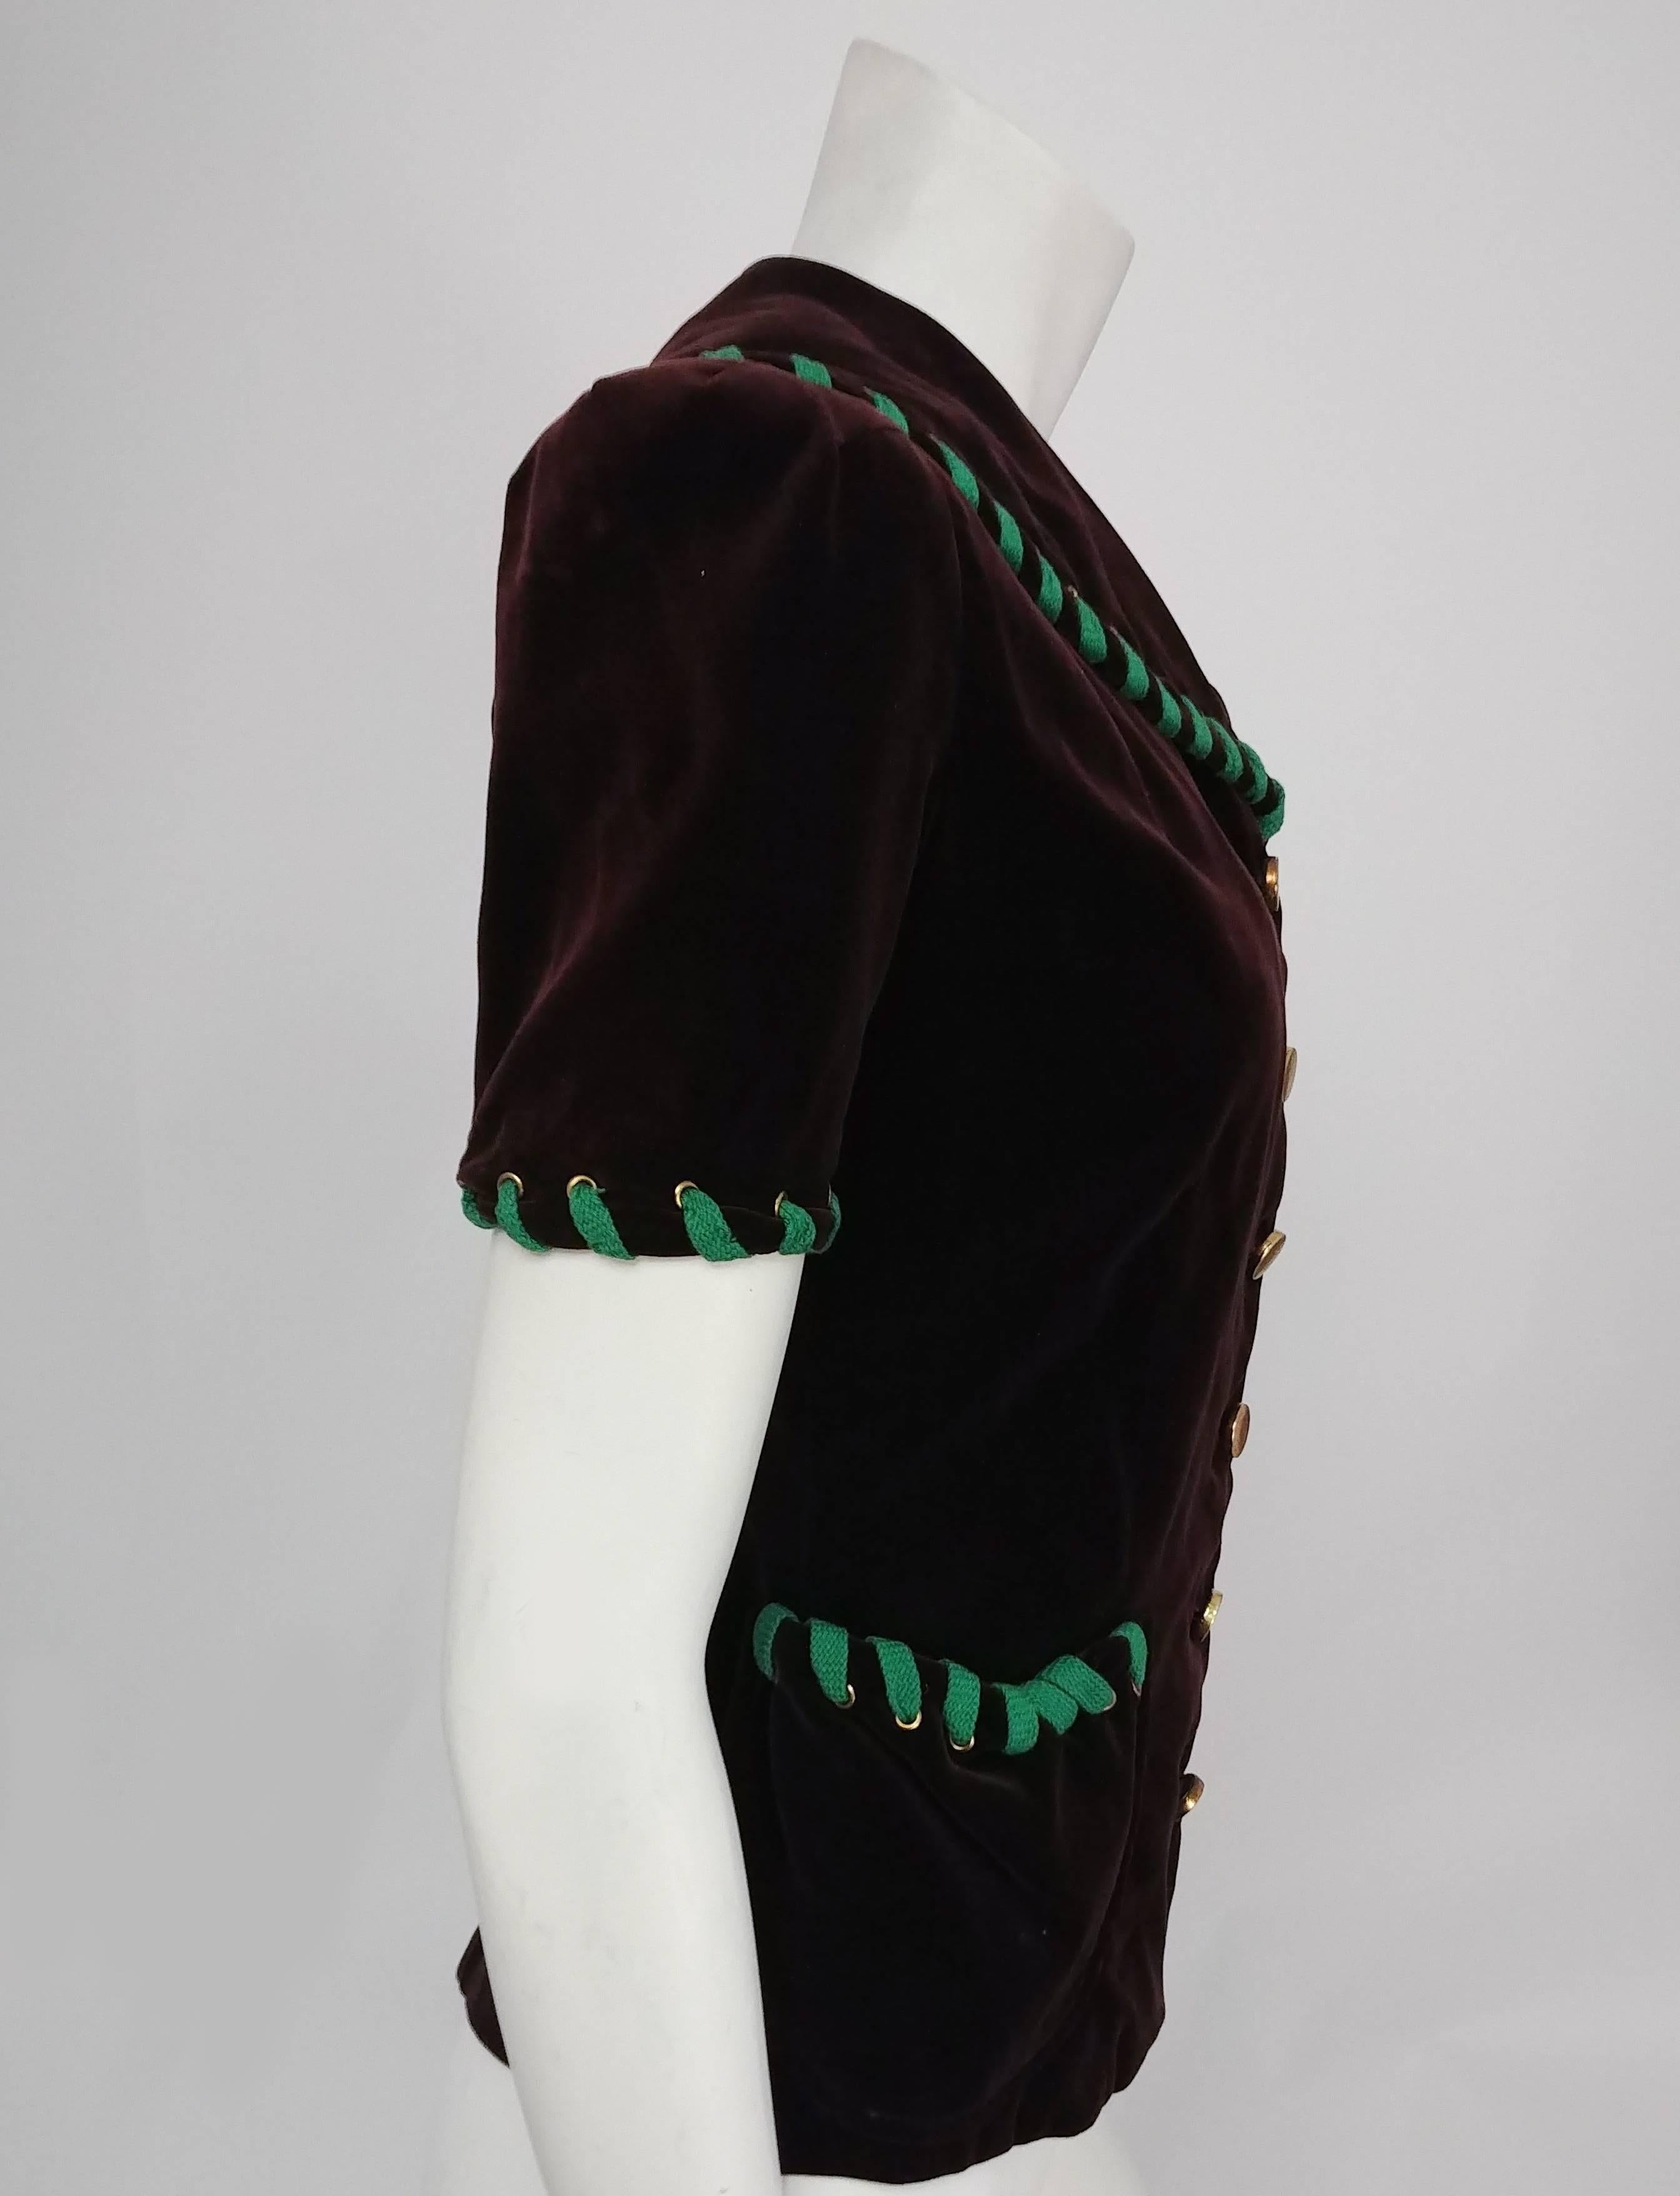 1940s Brown Velvet Top w/ Green Lacing. Adorable brown velvet top with gold buttons, green lacing at collar, sleeves, and hem.